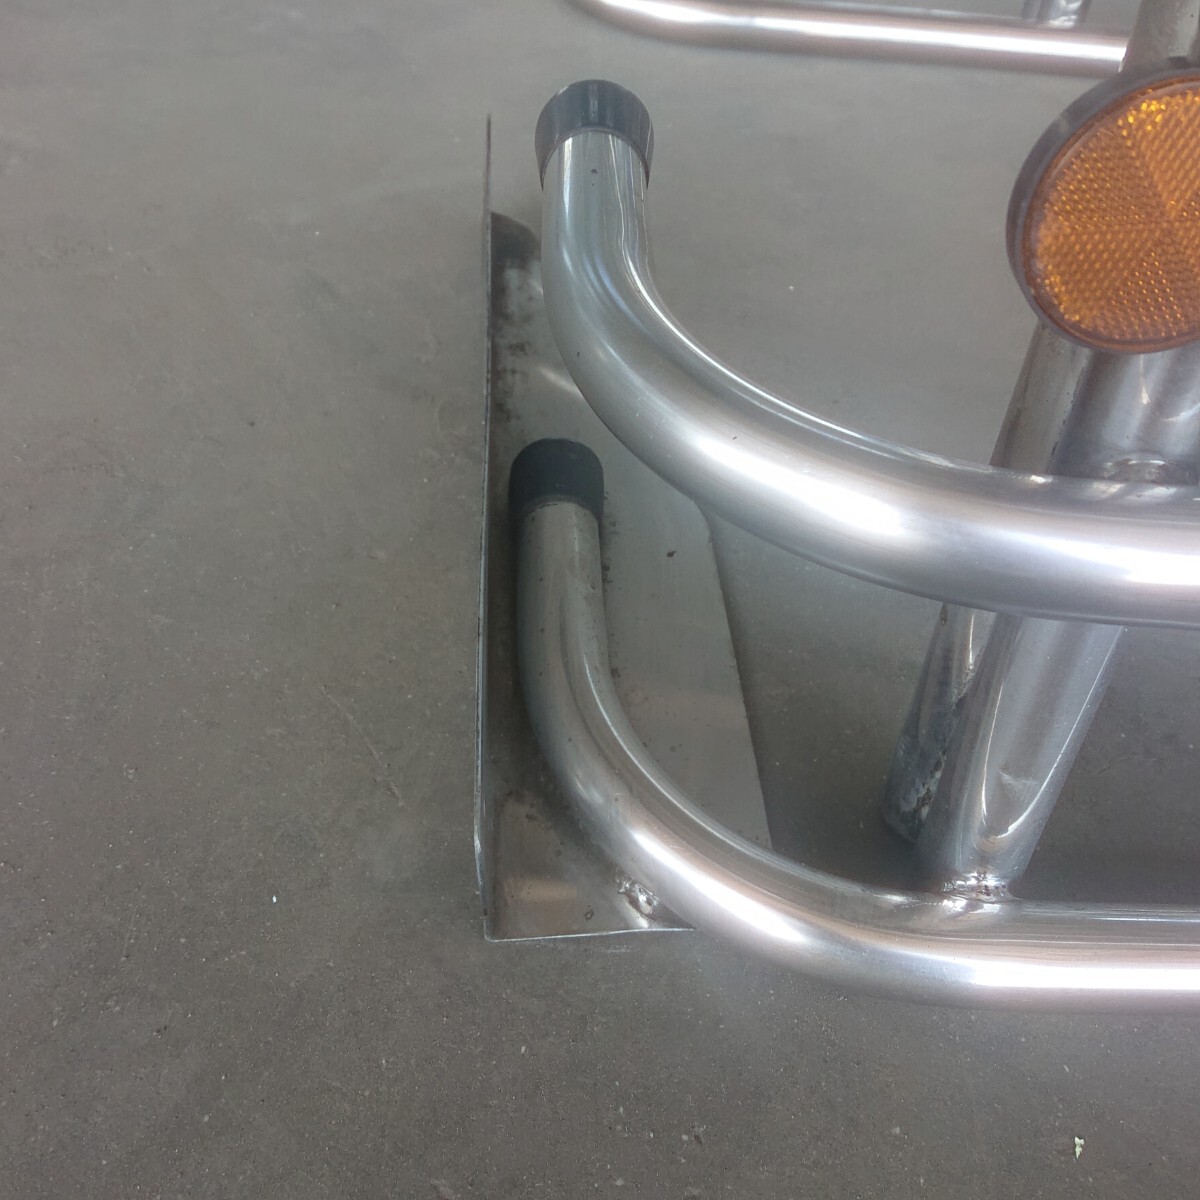  stainless steel side bumper 4 axis low floor length 2970 millimeter A0425-6-6